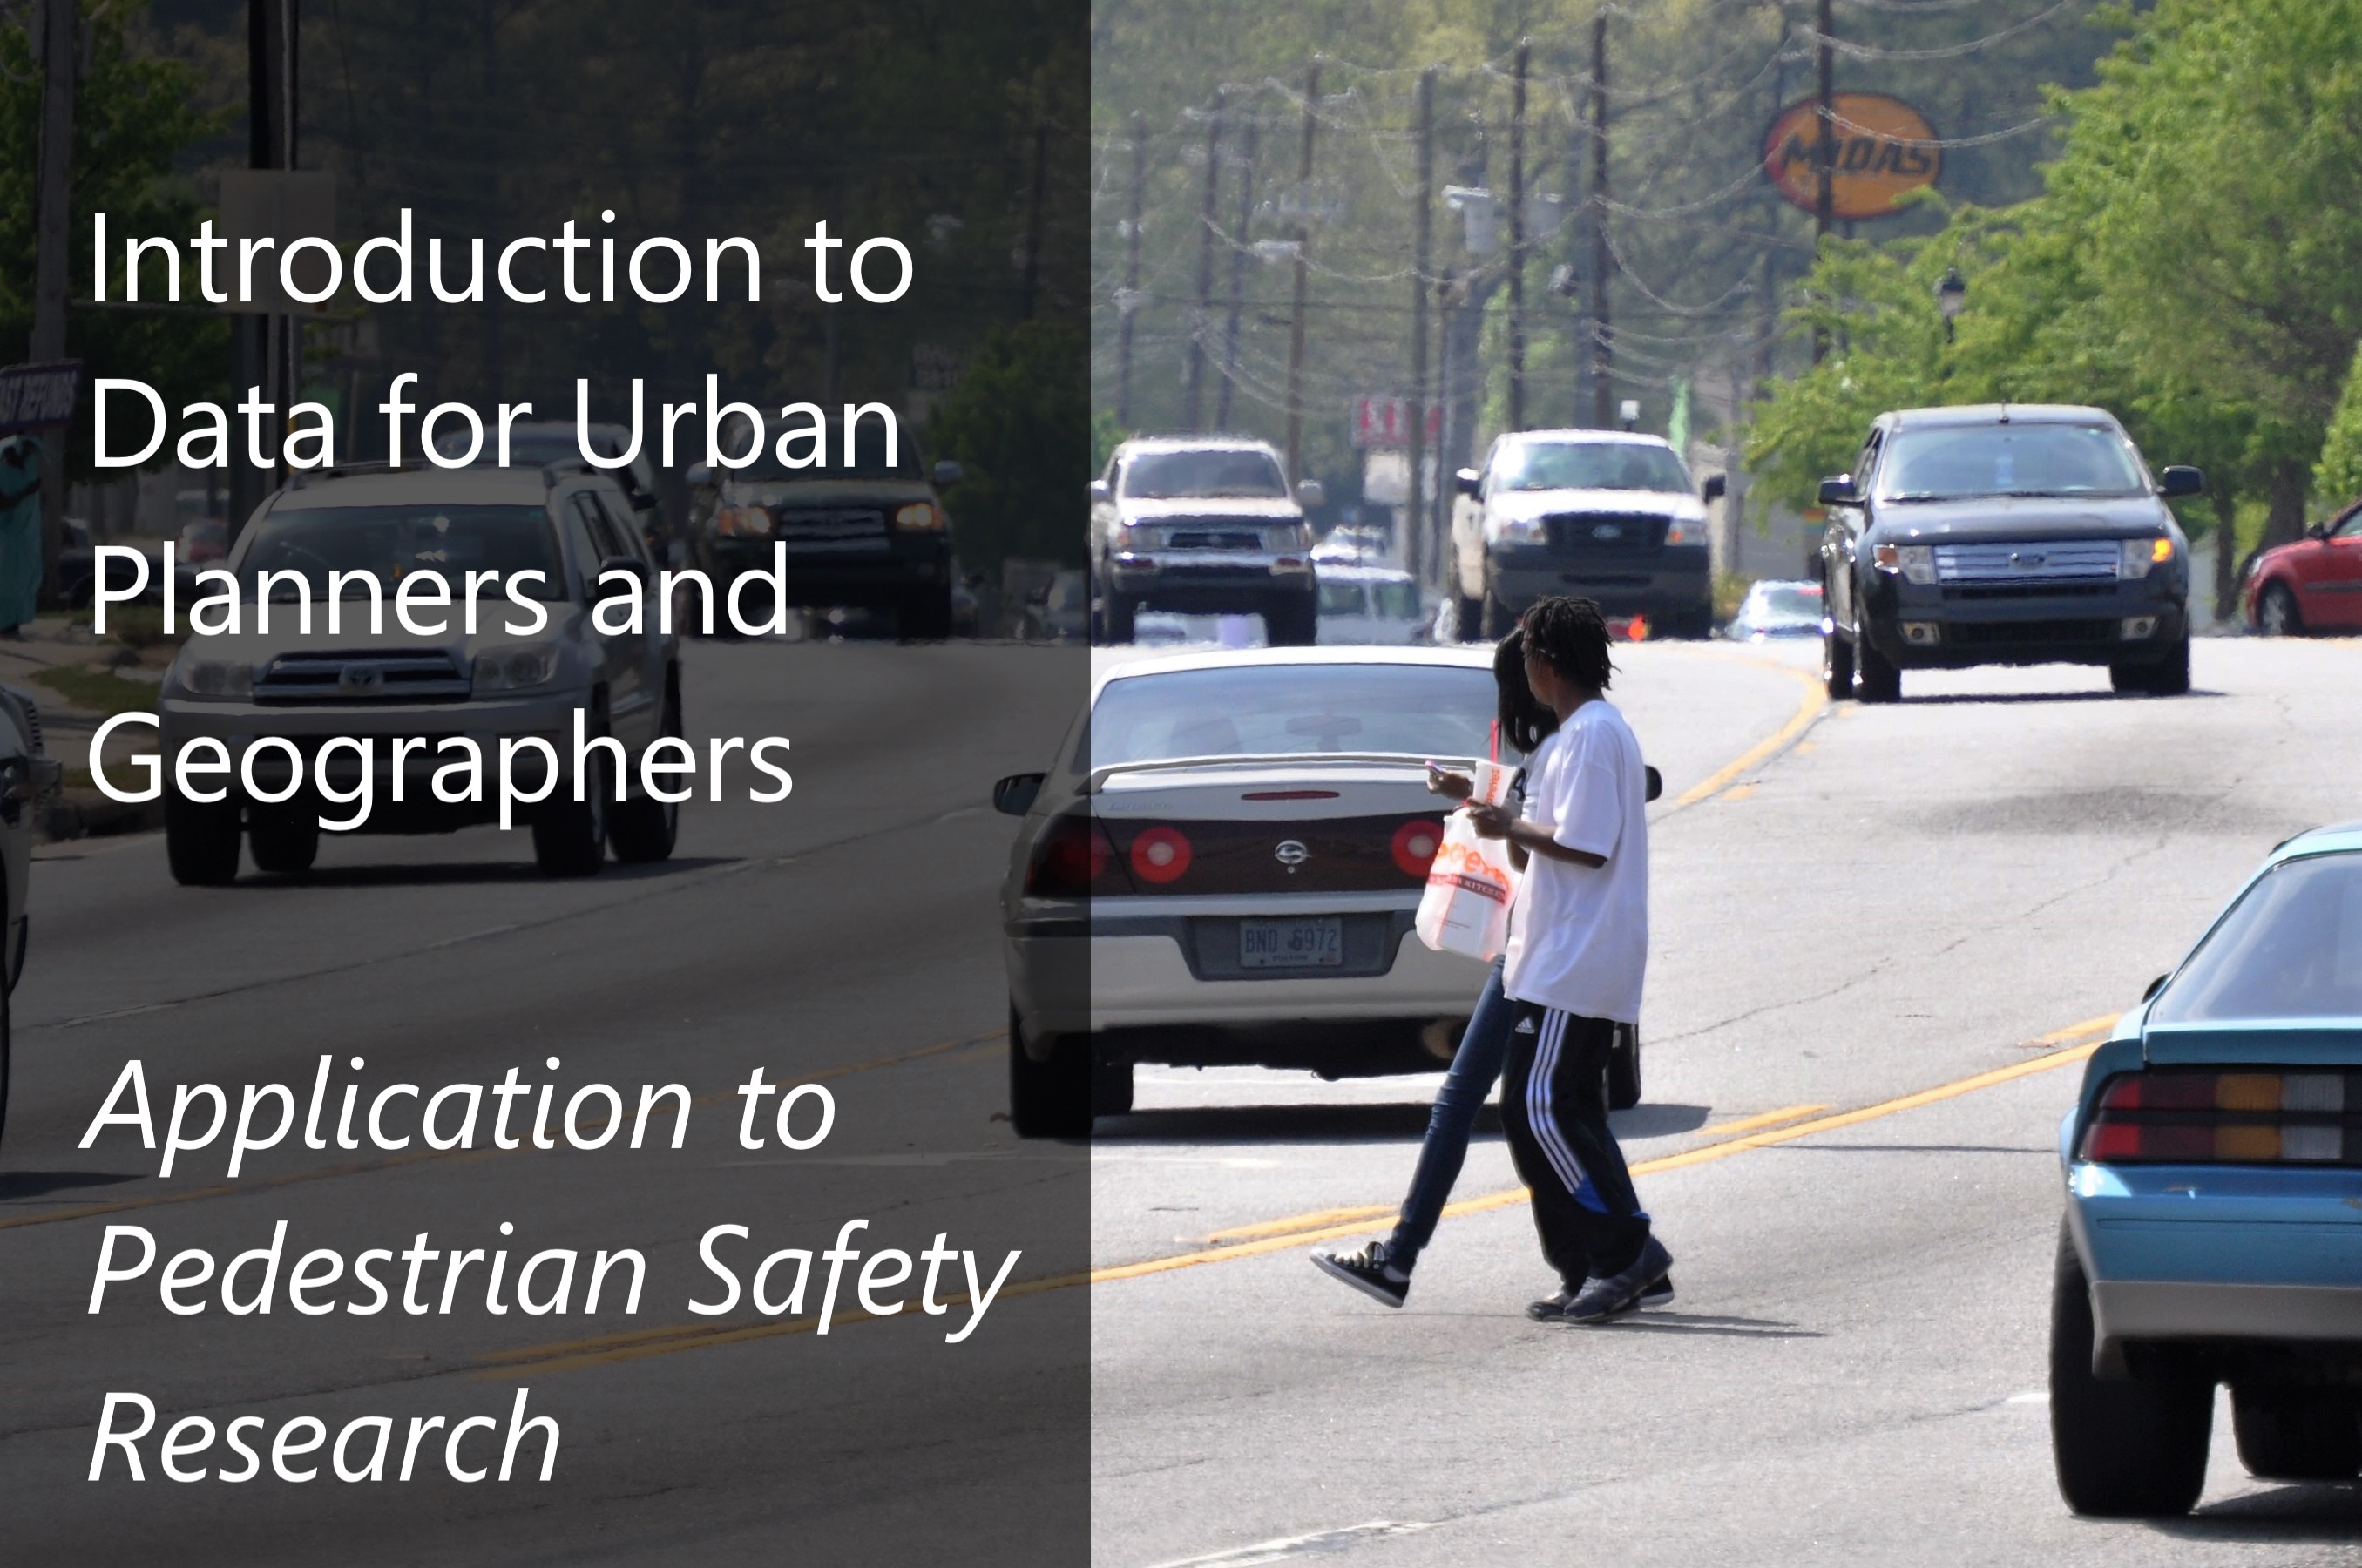 Introduction to Data for Urban Planners and Geographers | Application to Pedestrian Safety Research